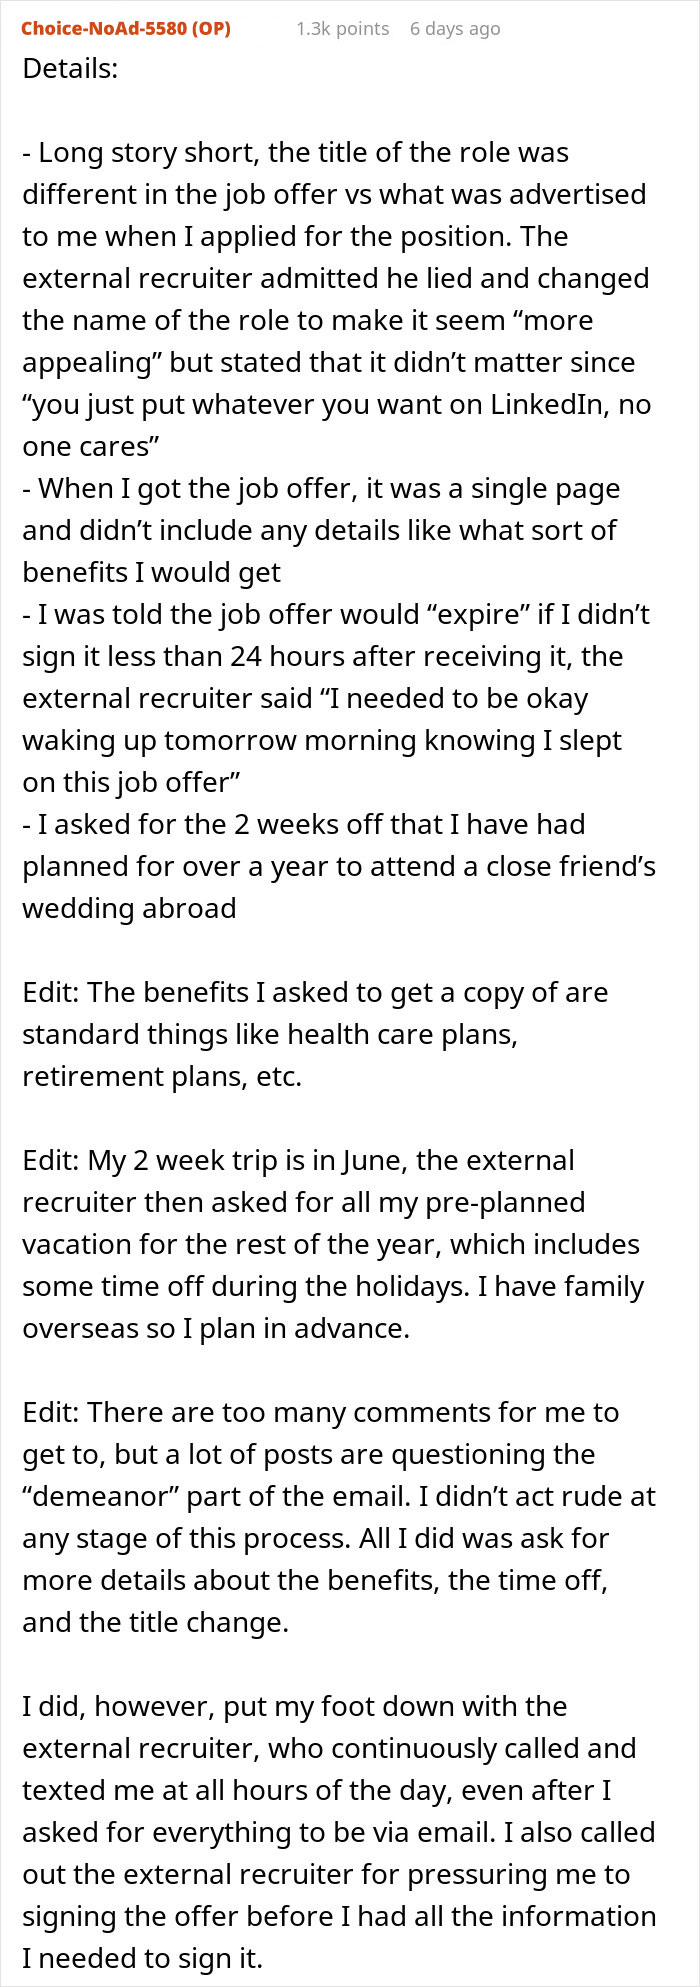 Man dodged bullet after recruiter canceled job offer because he wanted to know more about the benefits before signing